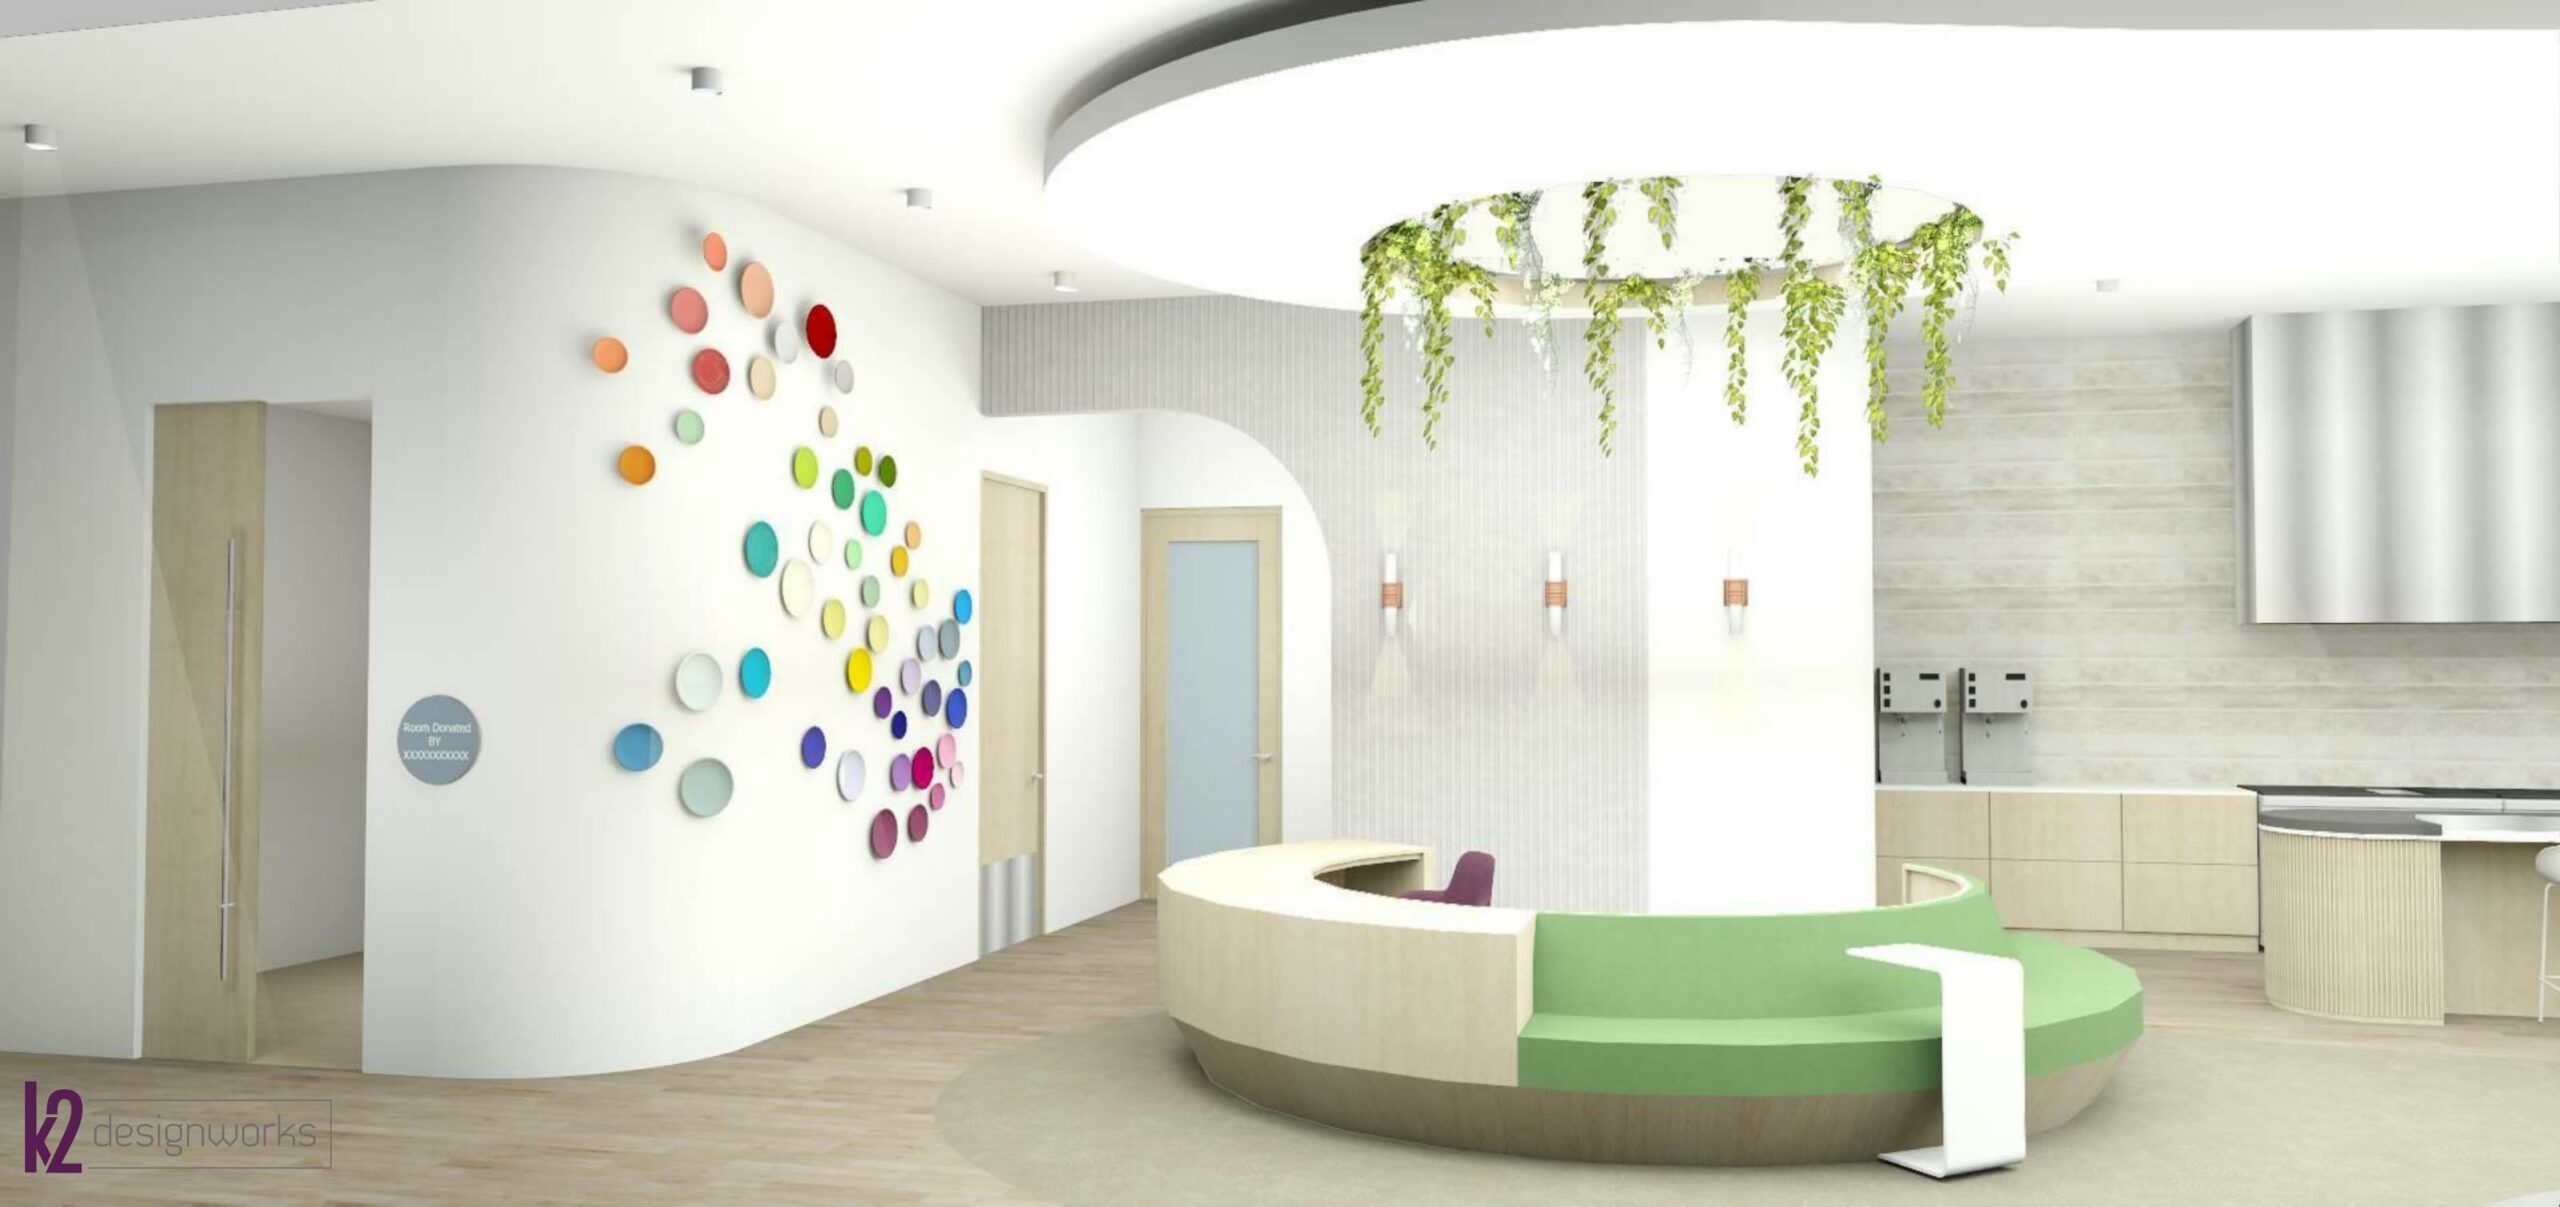 Interior rendering of the updated reception area. Rendering done by k2 designworks.